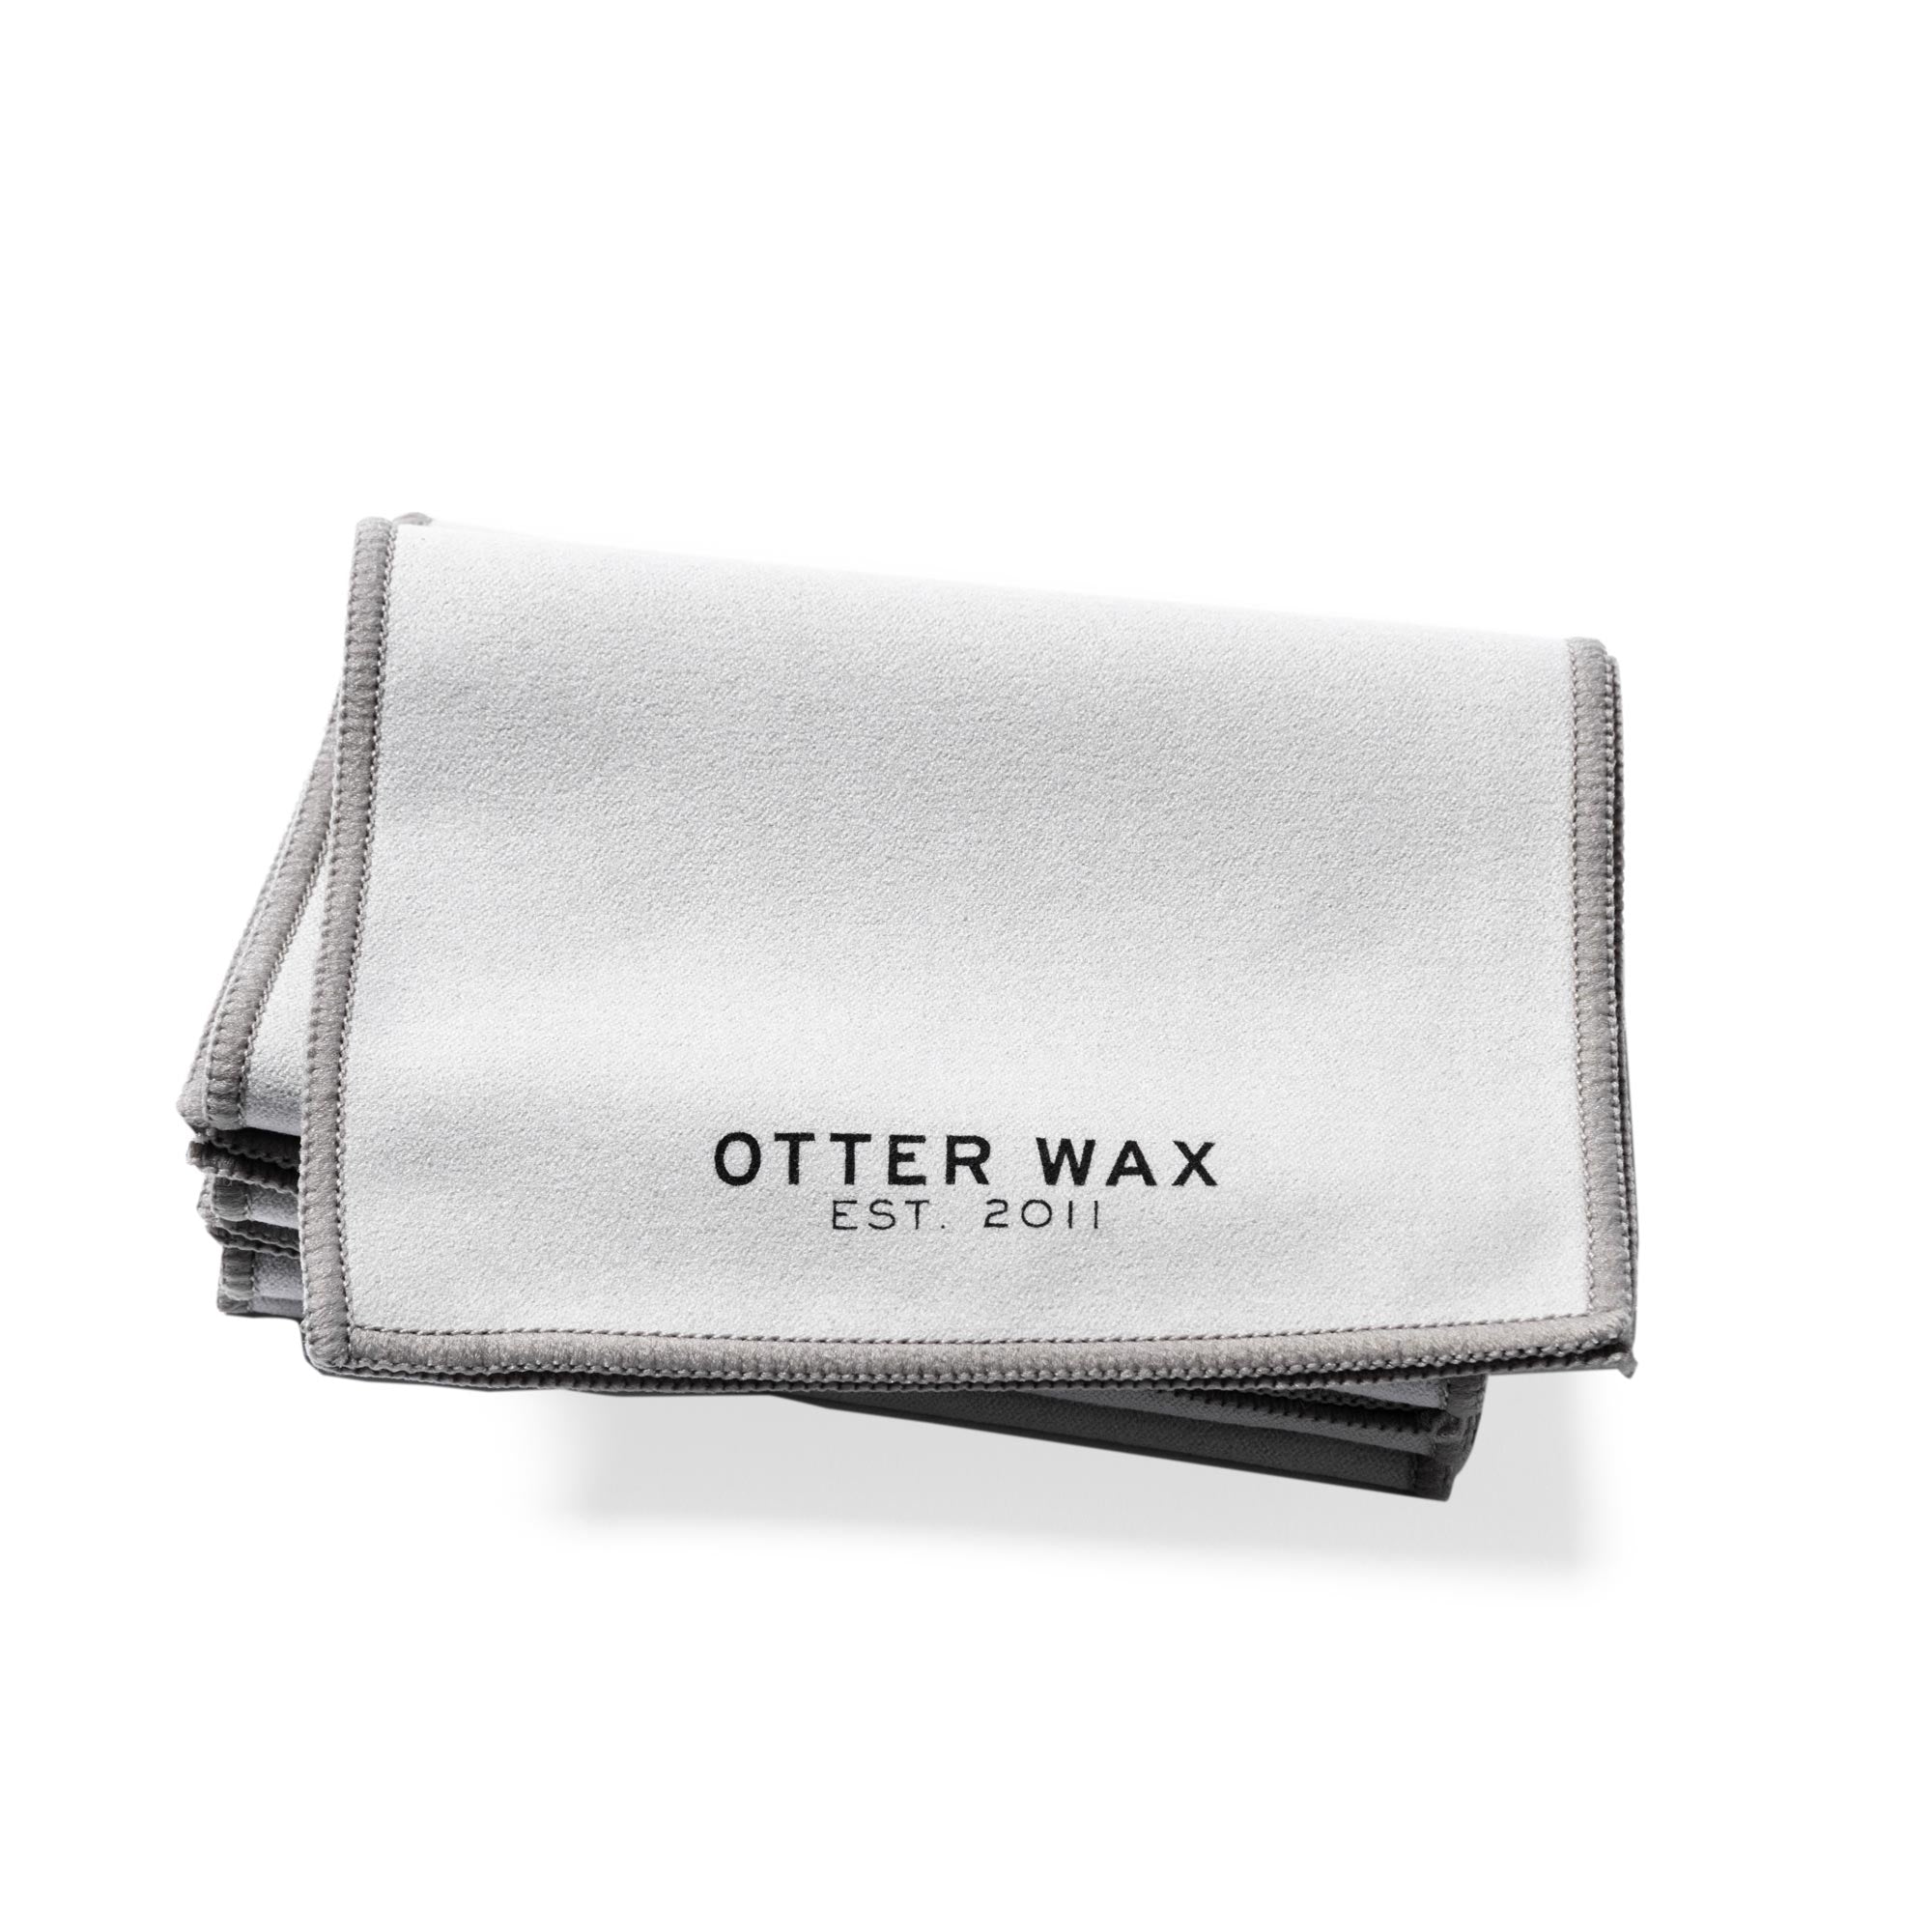 Leather and cotton care products from Otter Wax – Bad and Bold - Biker's  finest